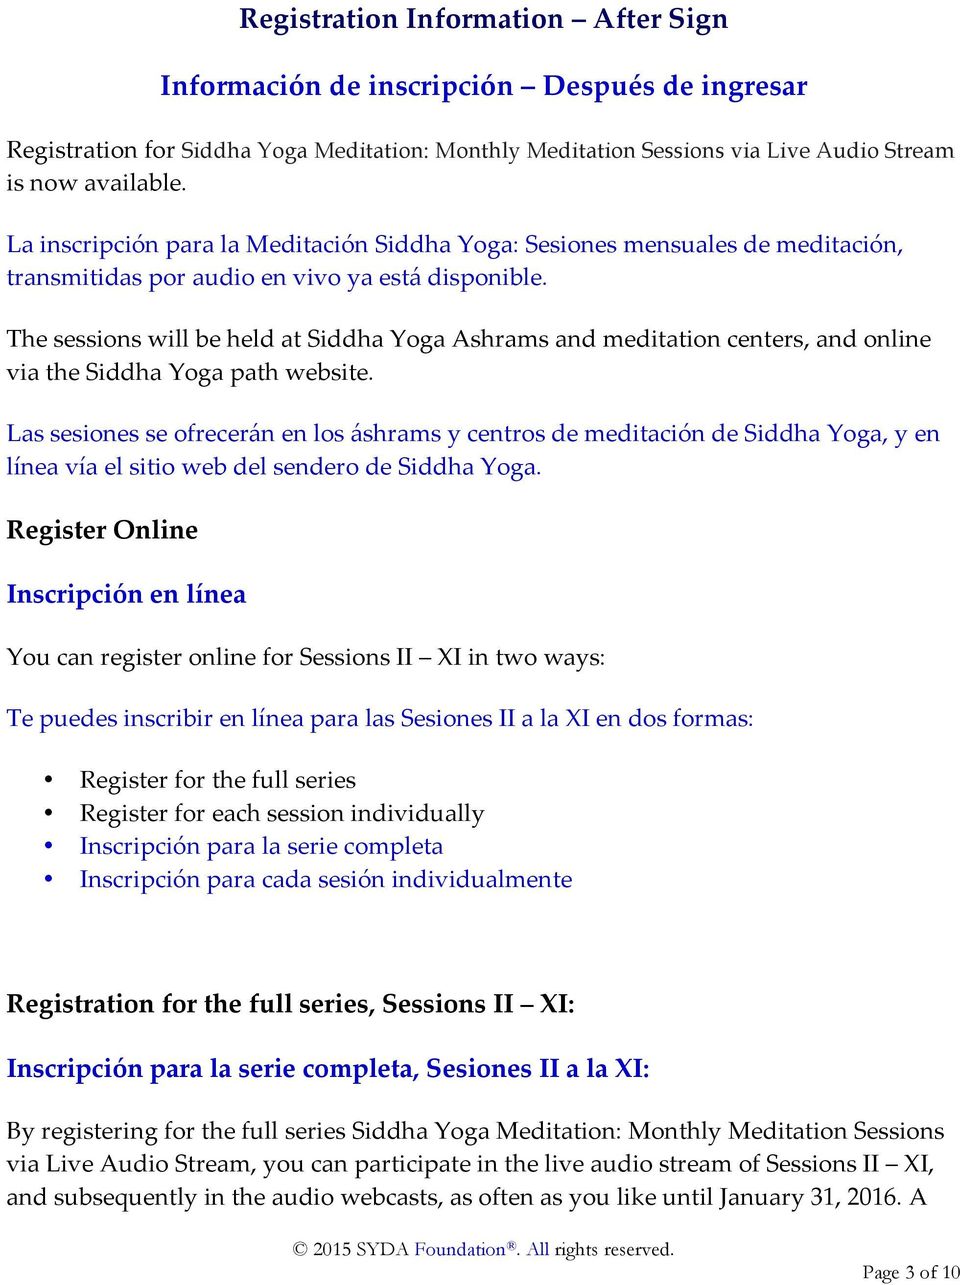 The sessions will be held at Siddha Yoga Ashrams and meditation centers, and online via the Siddha Yoga path website.